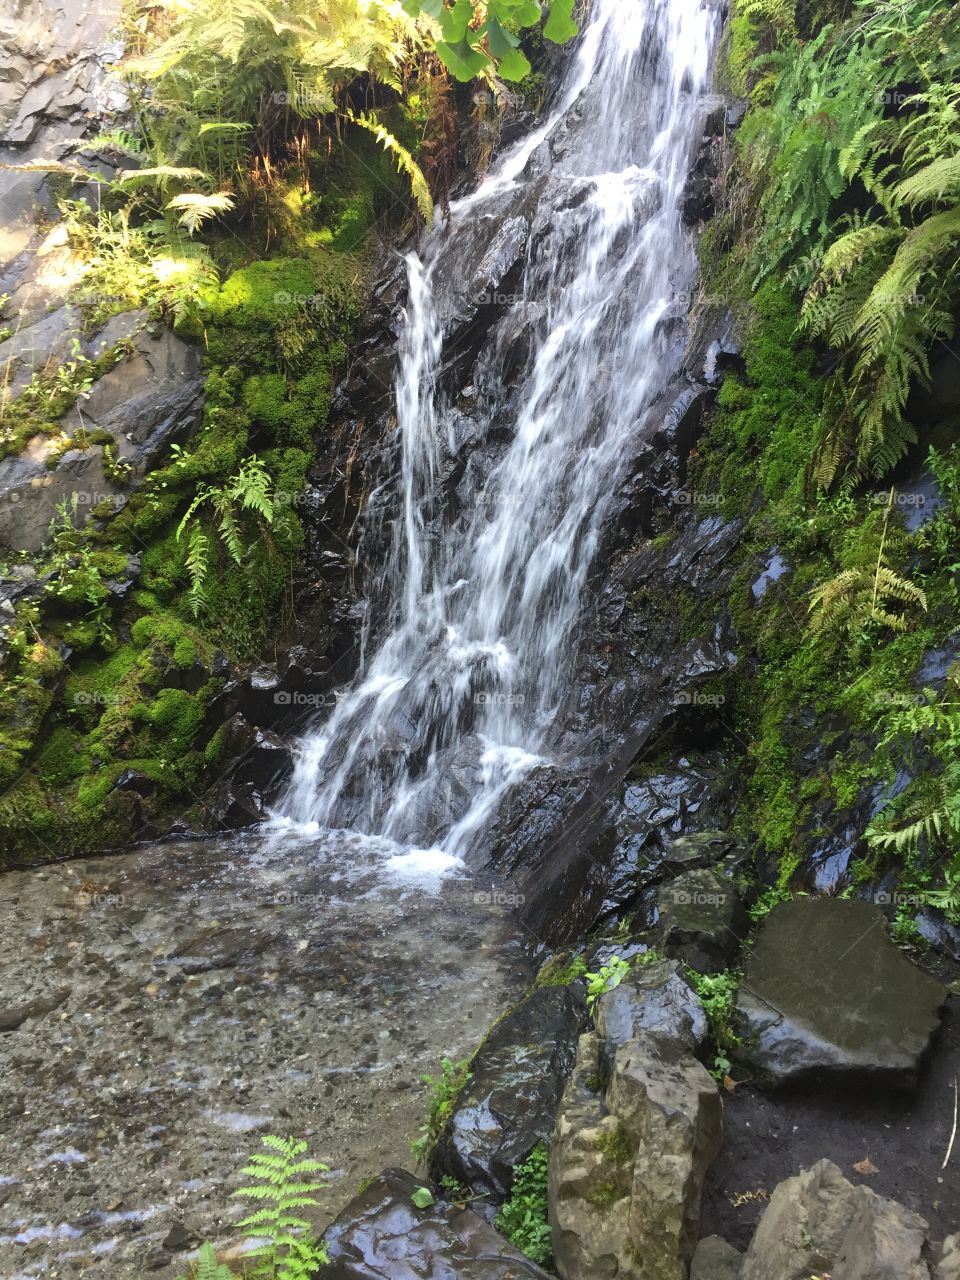 The waterfall in the main quarry garden at Queen Elizabeth Park in Vancouver, British Columbia.